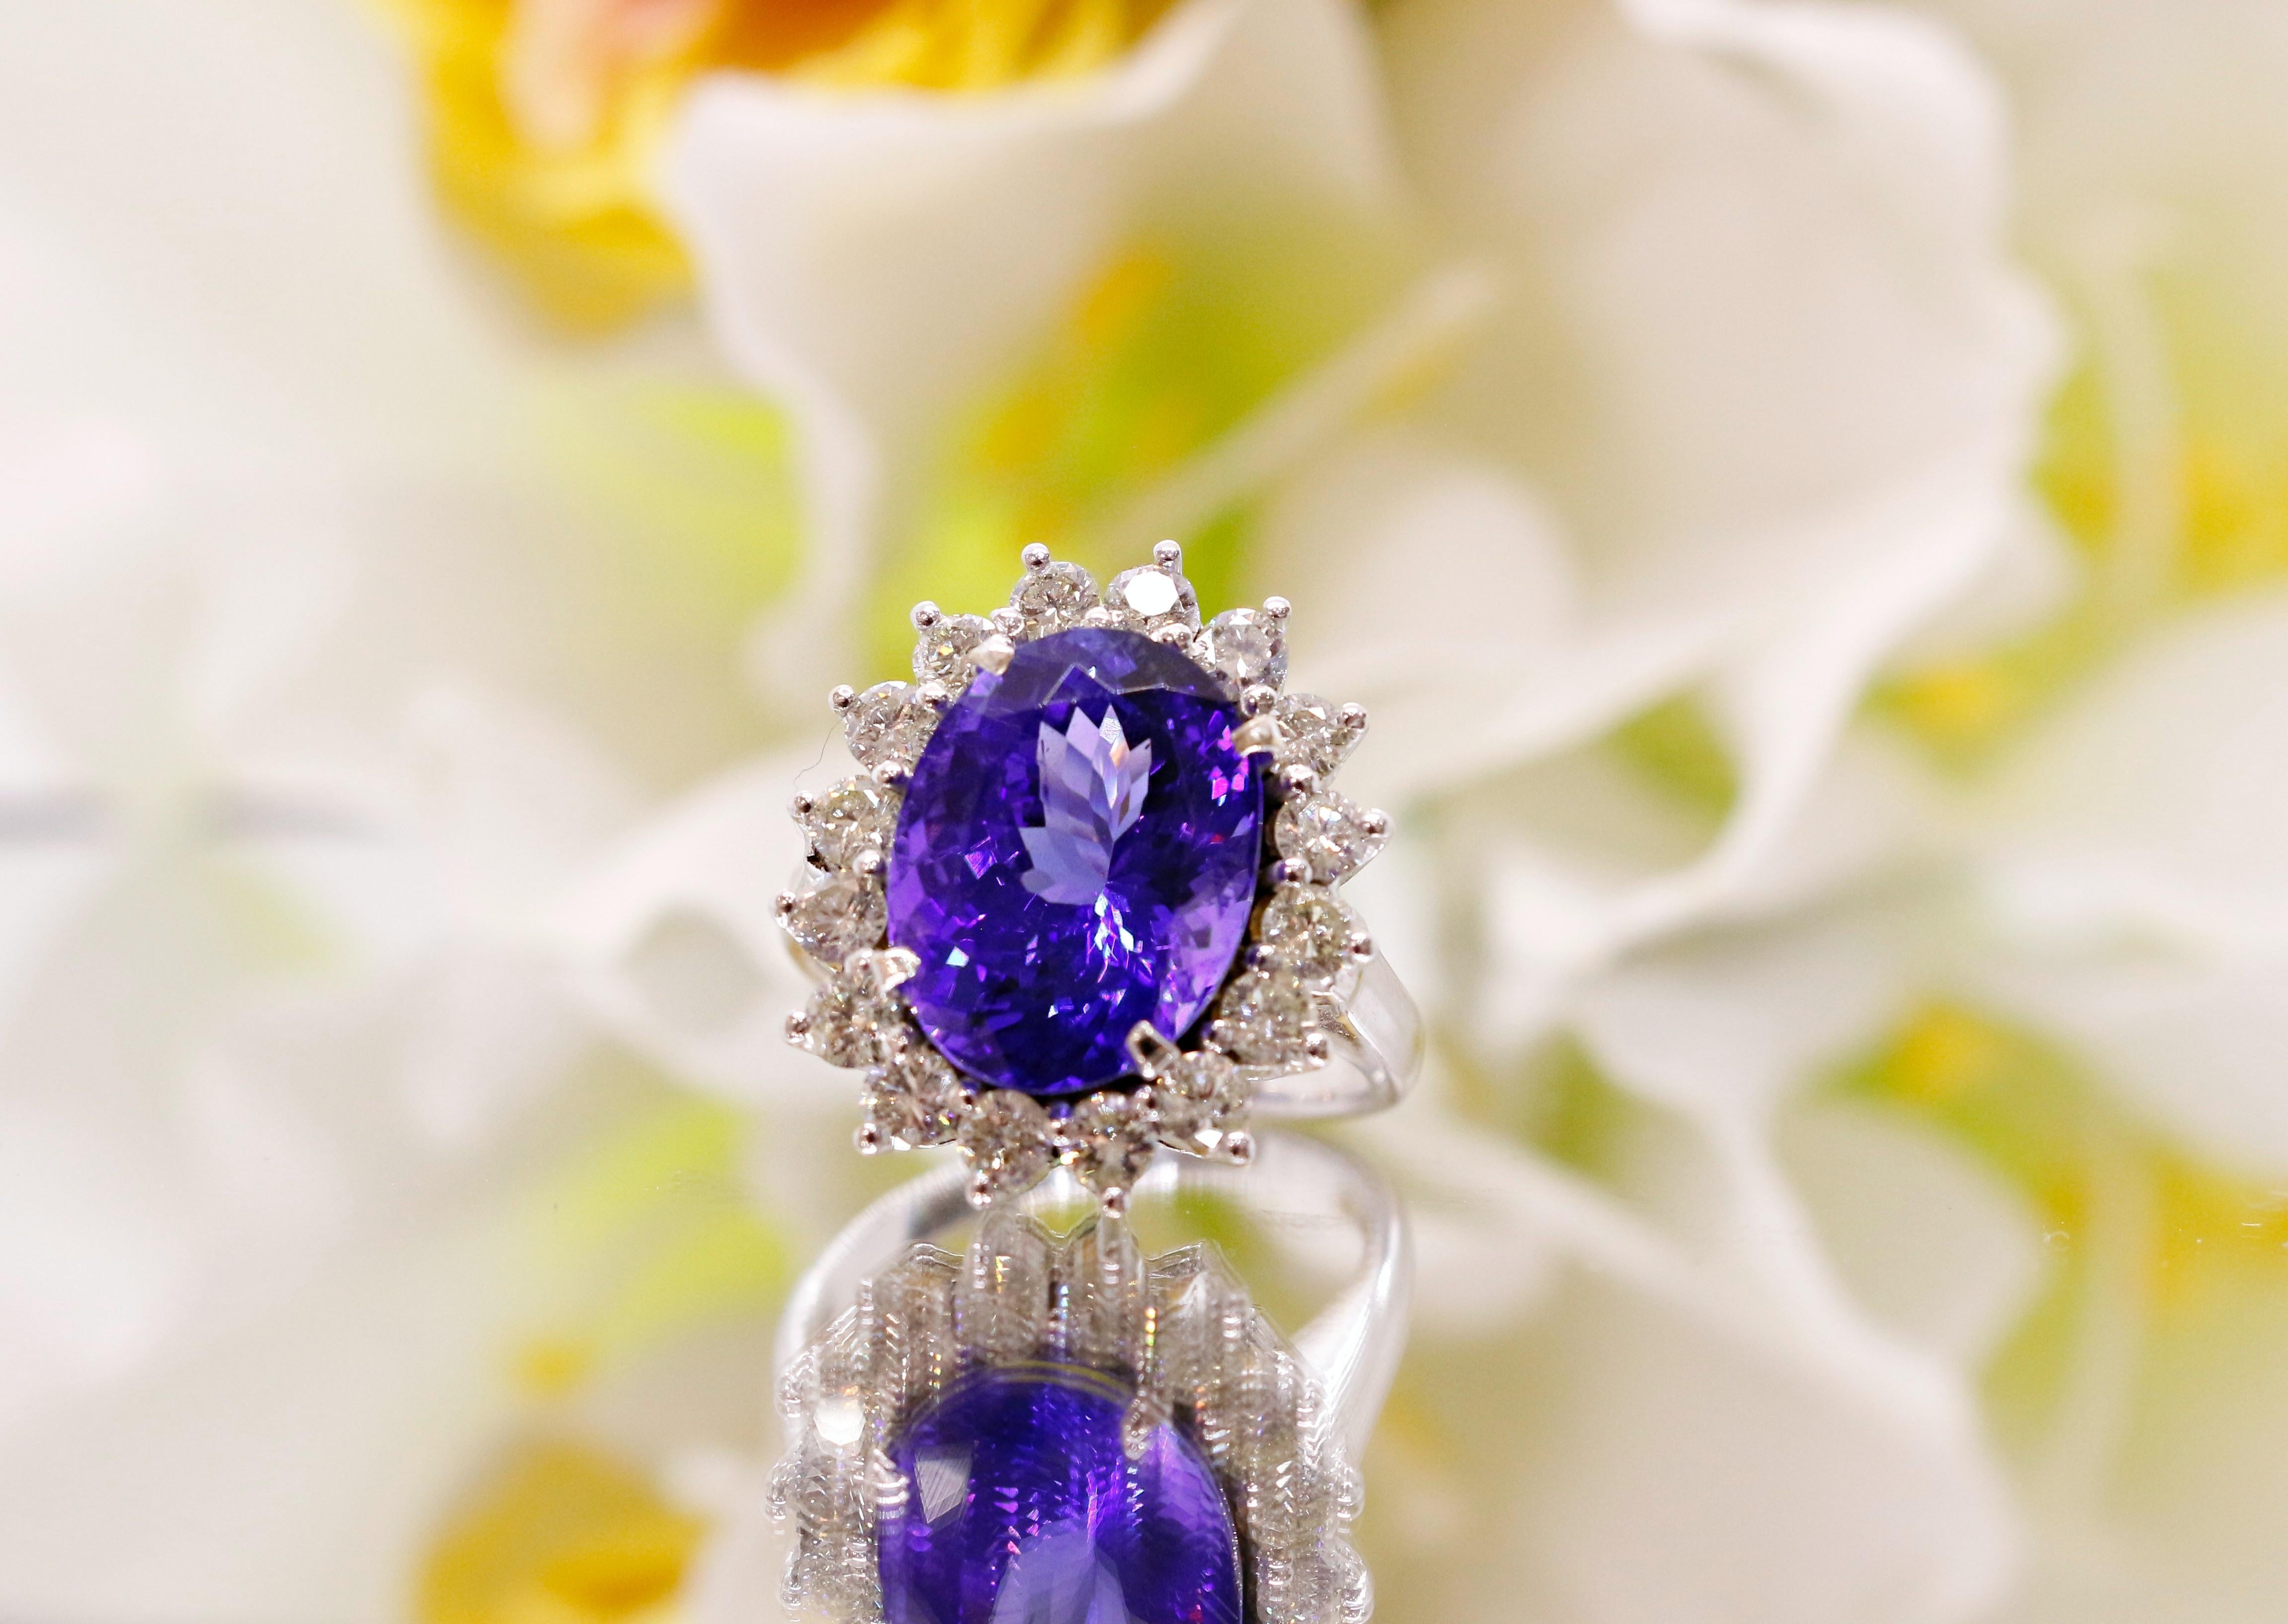 15ct Lavender Blue Tanzanite Cushion Cut Diamond Engagement Ring in 18k Gold
Material: Solid 18kt Gold

Tanzanite Weight: 15 CT
Diamond Carat Total: 2 CT
Diamond Shape: Round Mixed
Total Weight of Ring: 9.2 Gram

Discover unmatched elegance with our